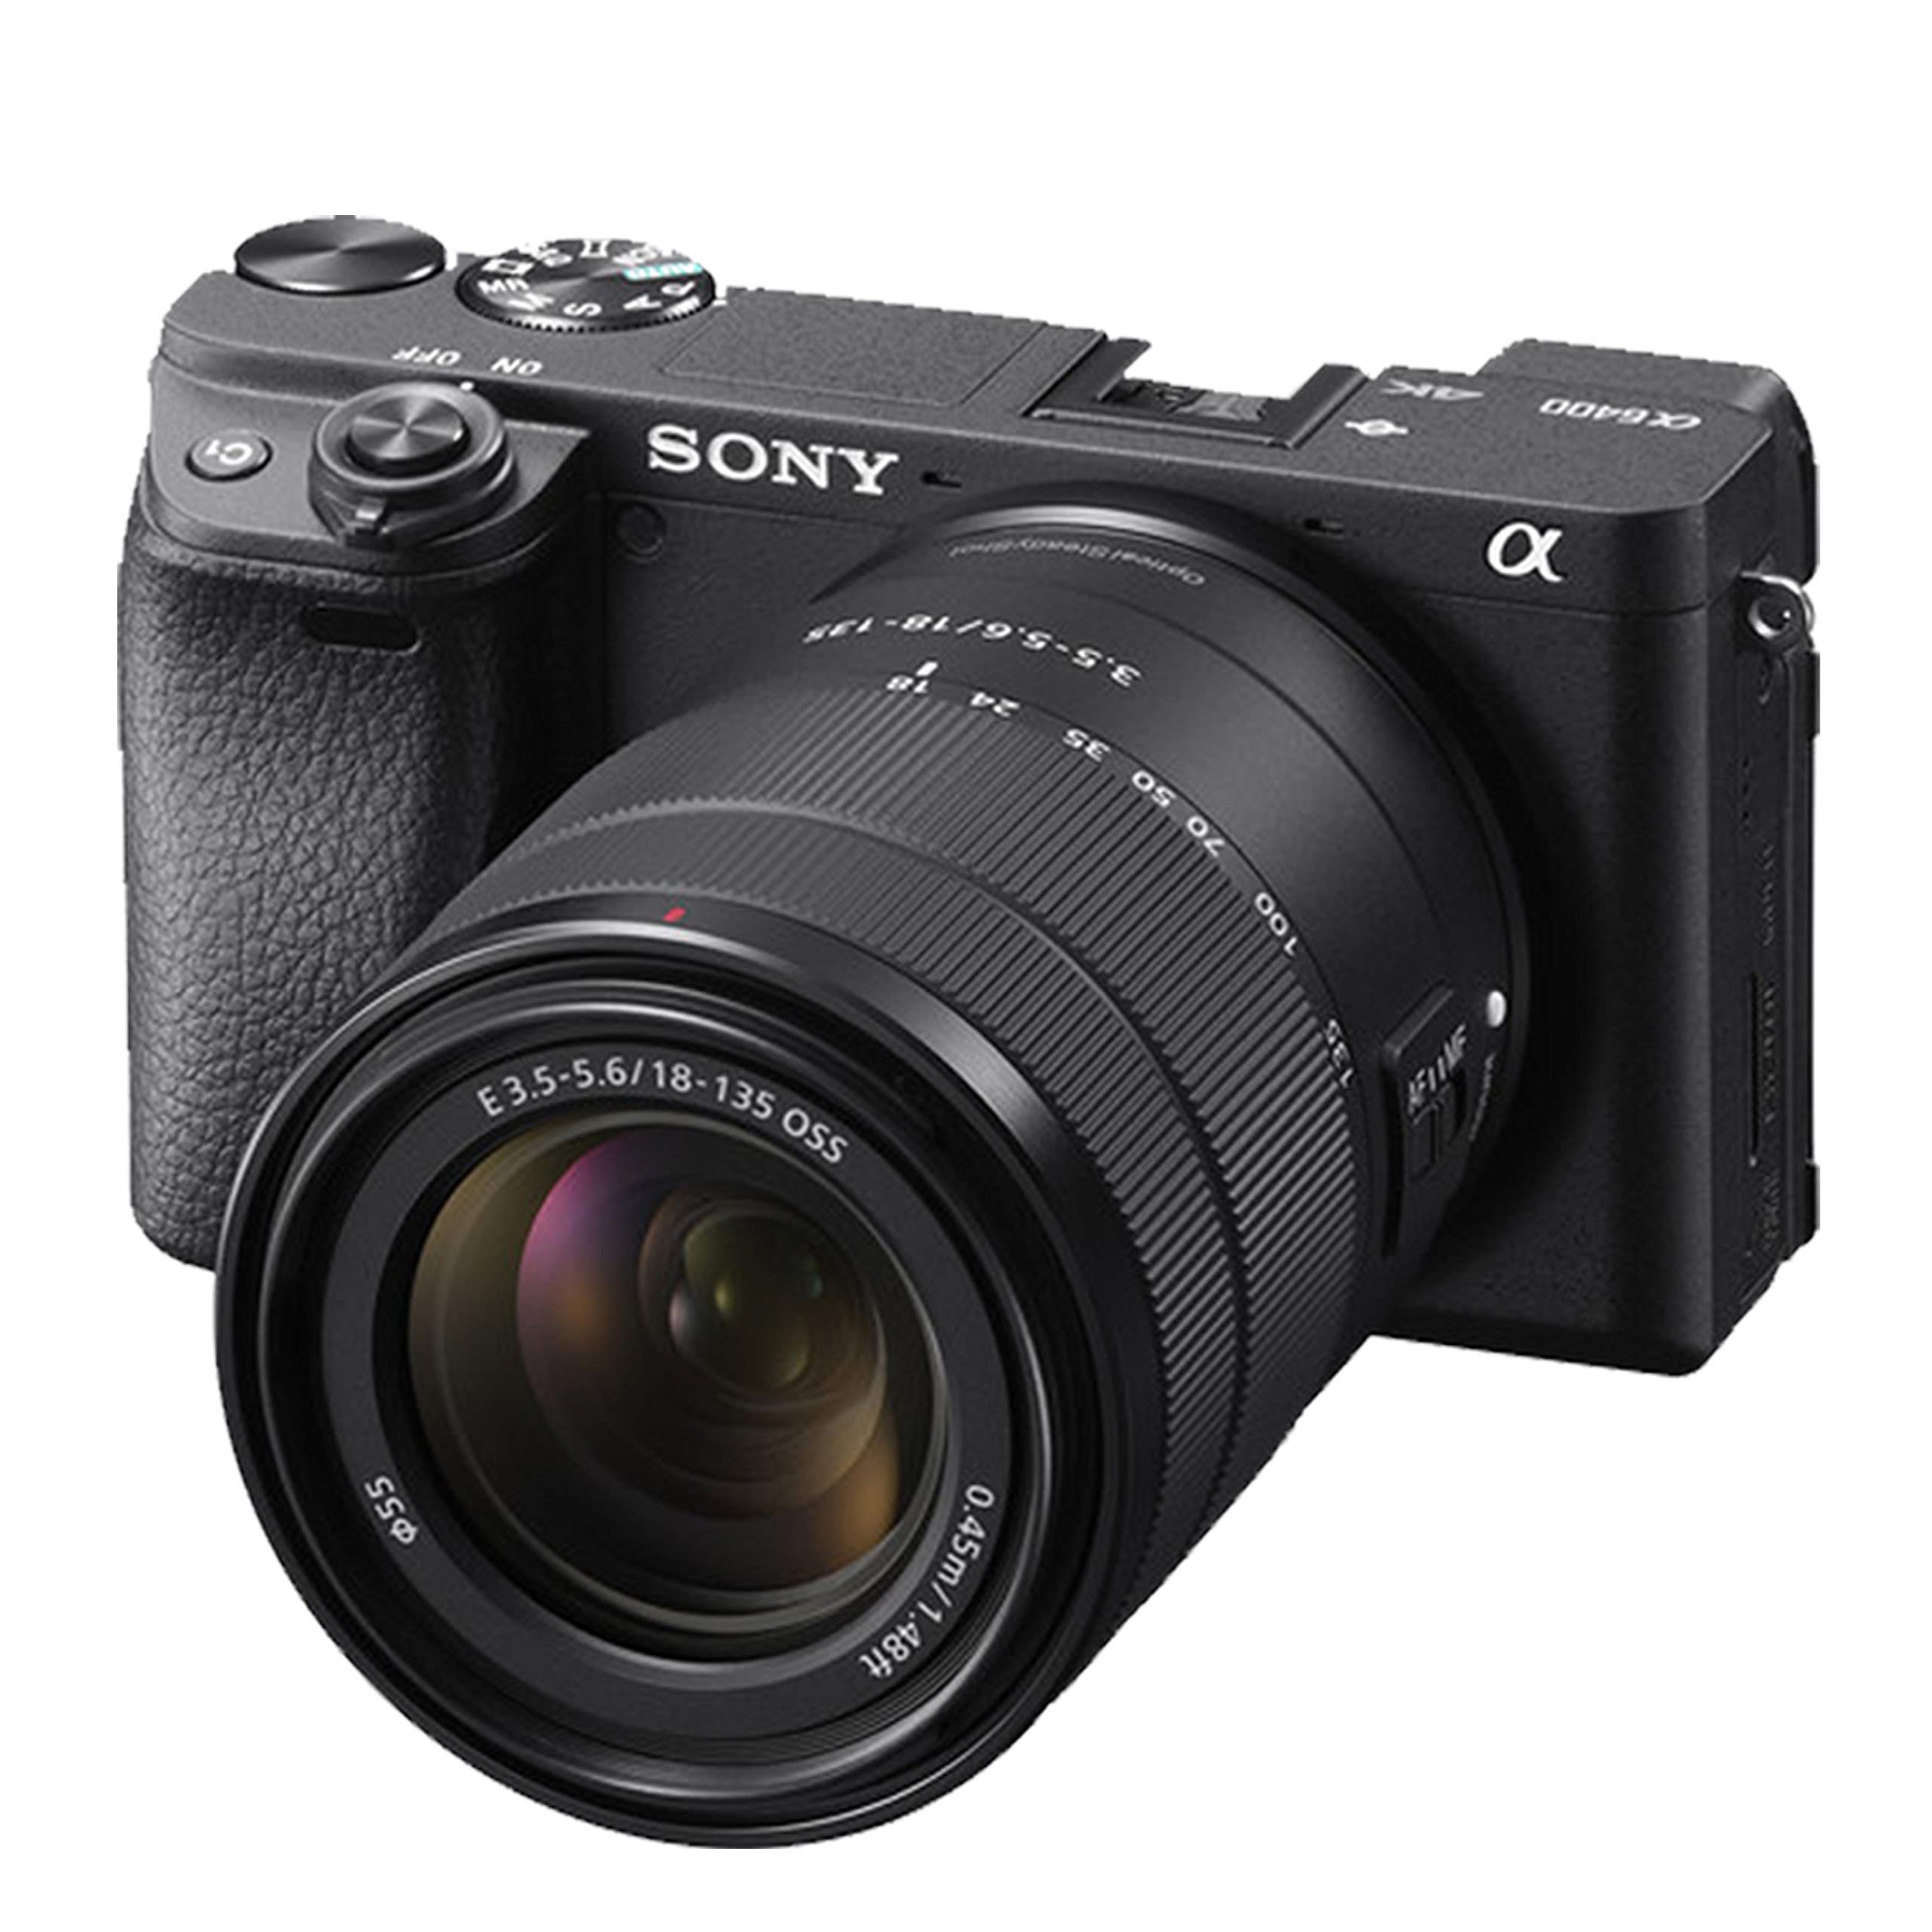 Sony Alpha a6400 Mirrorless Digital Camera 24.2MP w/ 18-135mm Lens ILCE-6400M/B + Spare Battery + SanDisk 64GB Extreme PRO SDXC UHS-I / V30 / U3 / Class 10, 170 MB/s Memory Card + More (28PC Bundle)